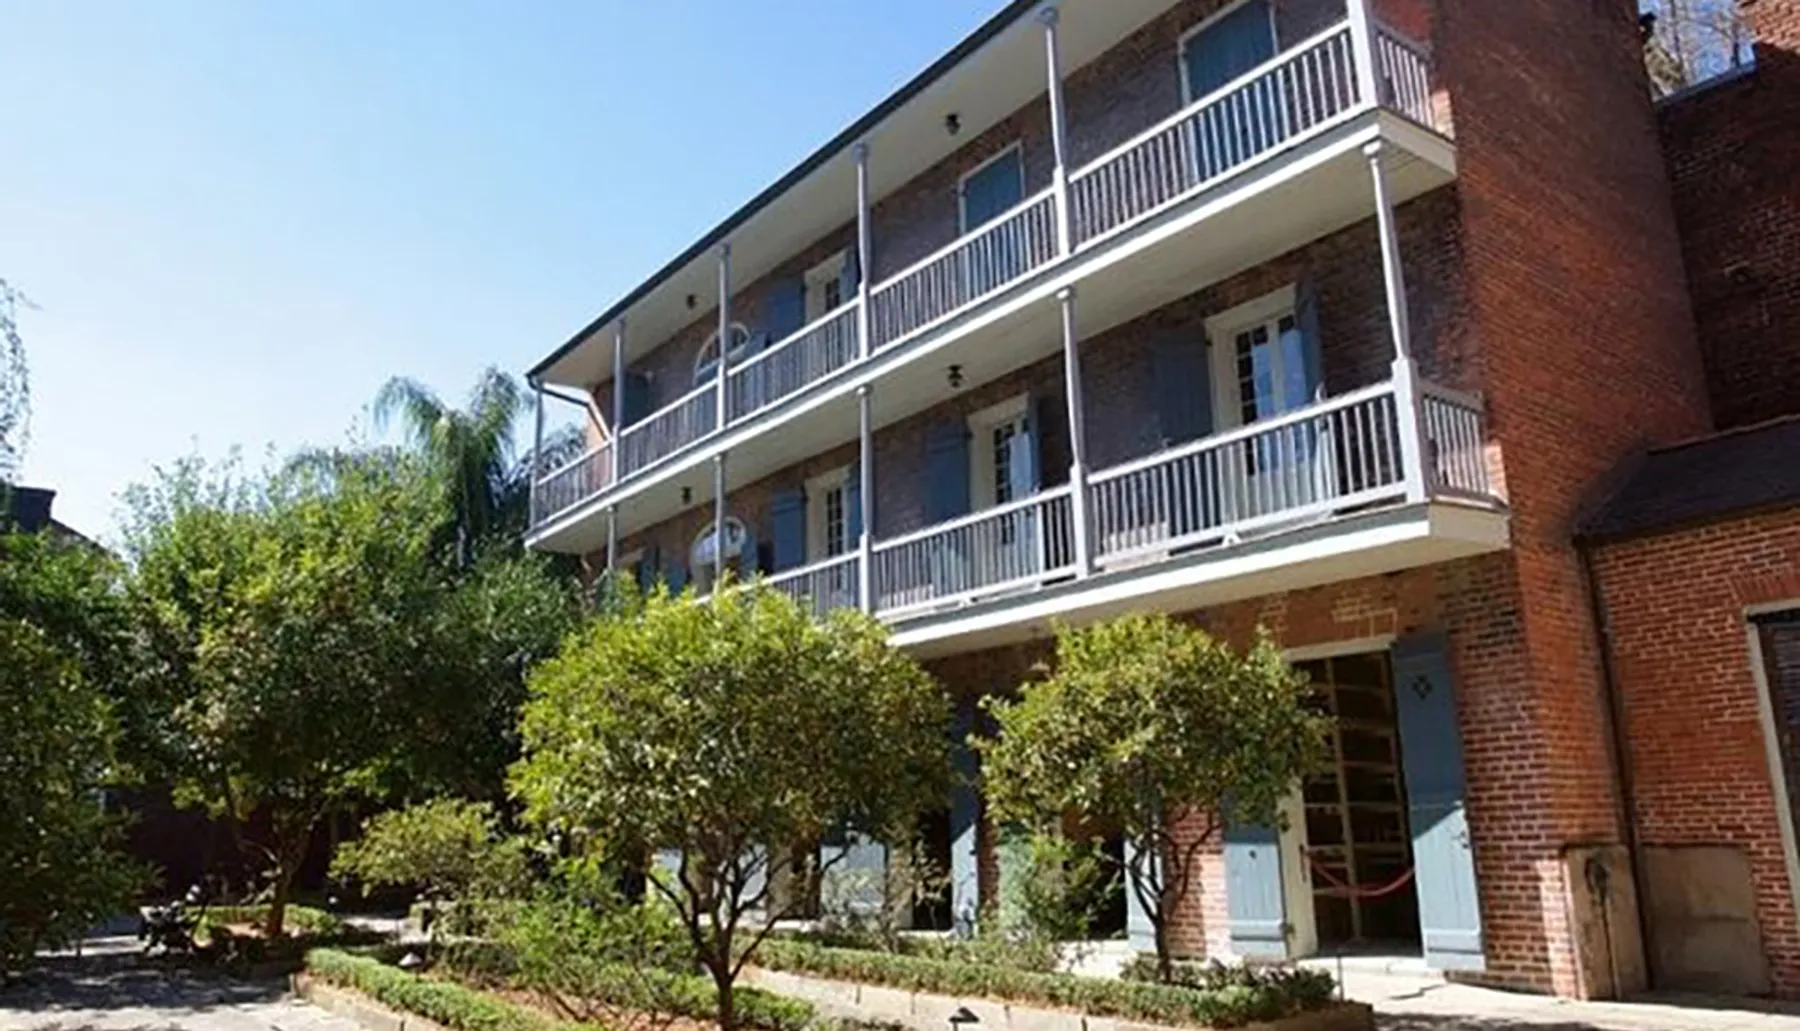 The image shows a two-story brick building with white balconies, surrounded by green shrubbery under a clear blue sky.